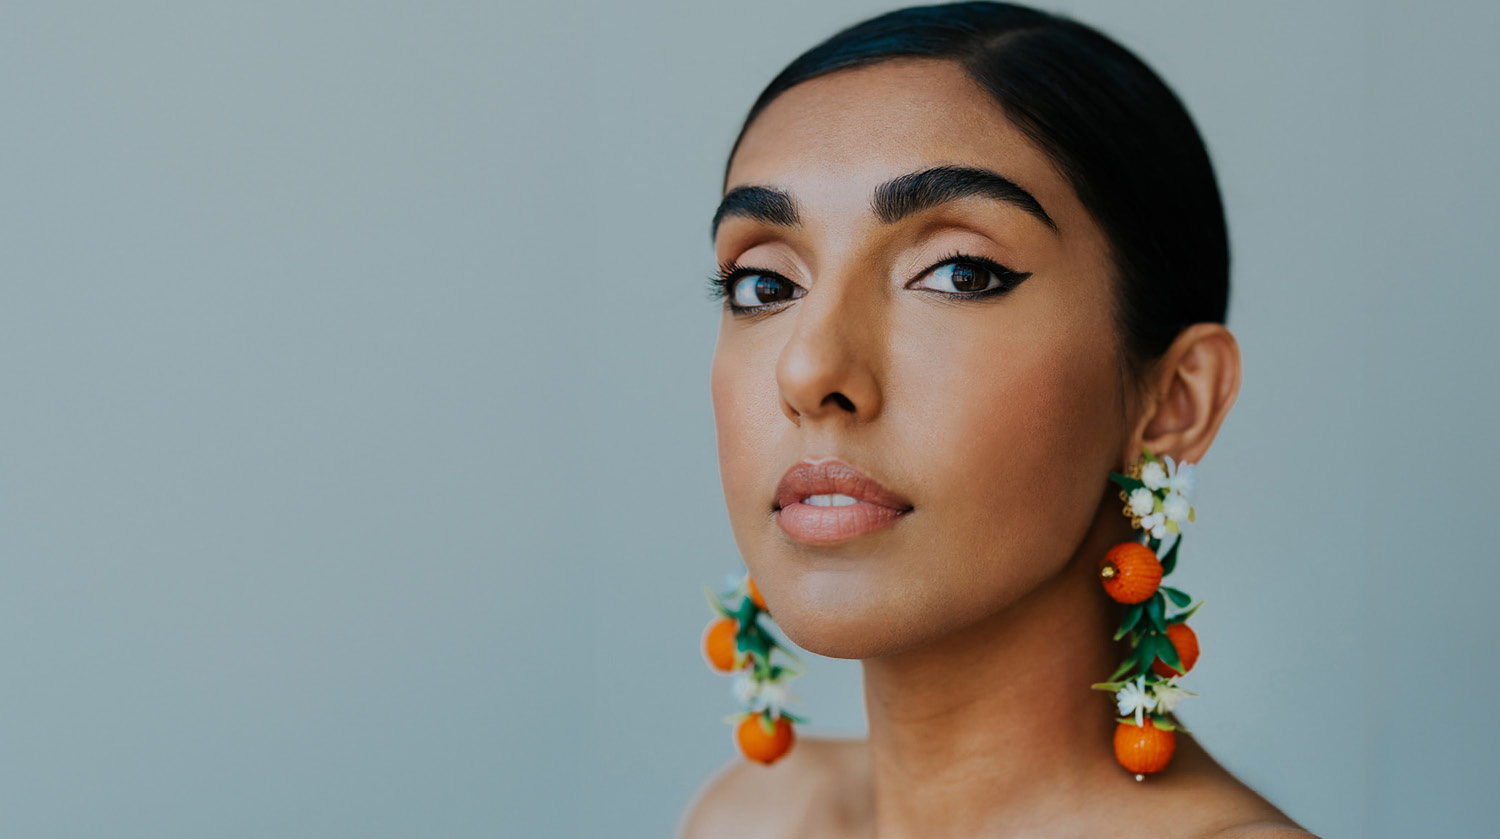 Image of Rupi Kaur before a pale blue-grey backdrop. She has warm-toned skin, deep brown eyes, and slicked-back black hair. She wears long beaded earrings, adorned with oranges and white flowers. 